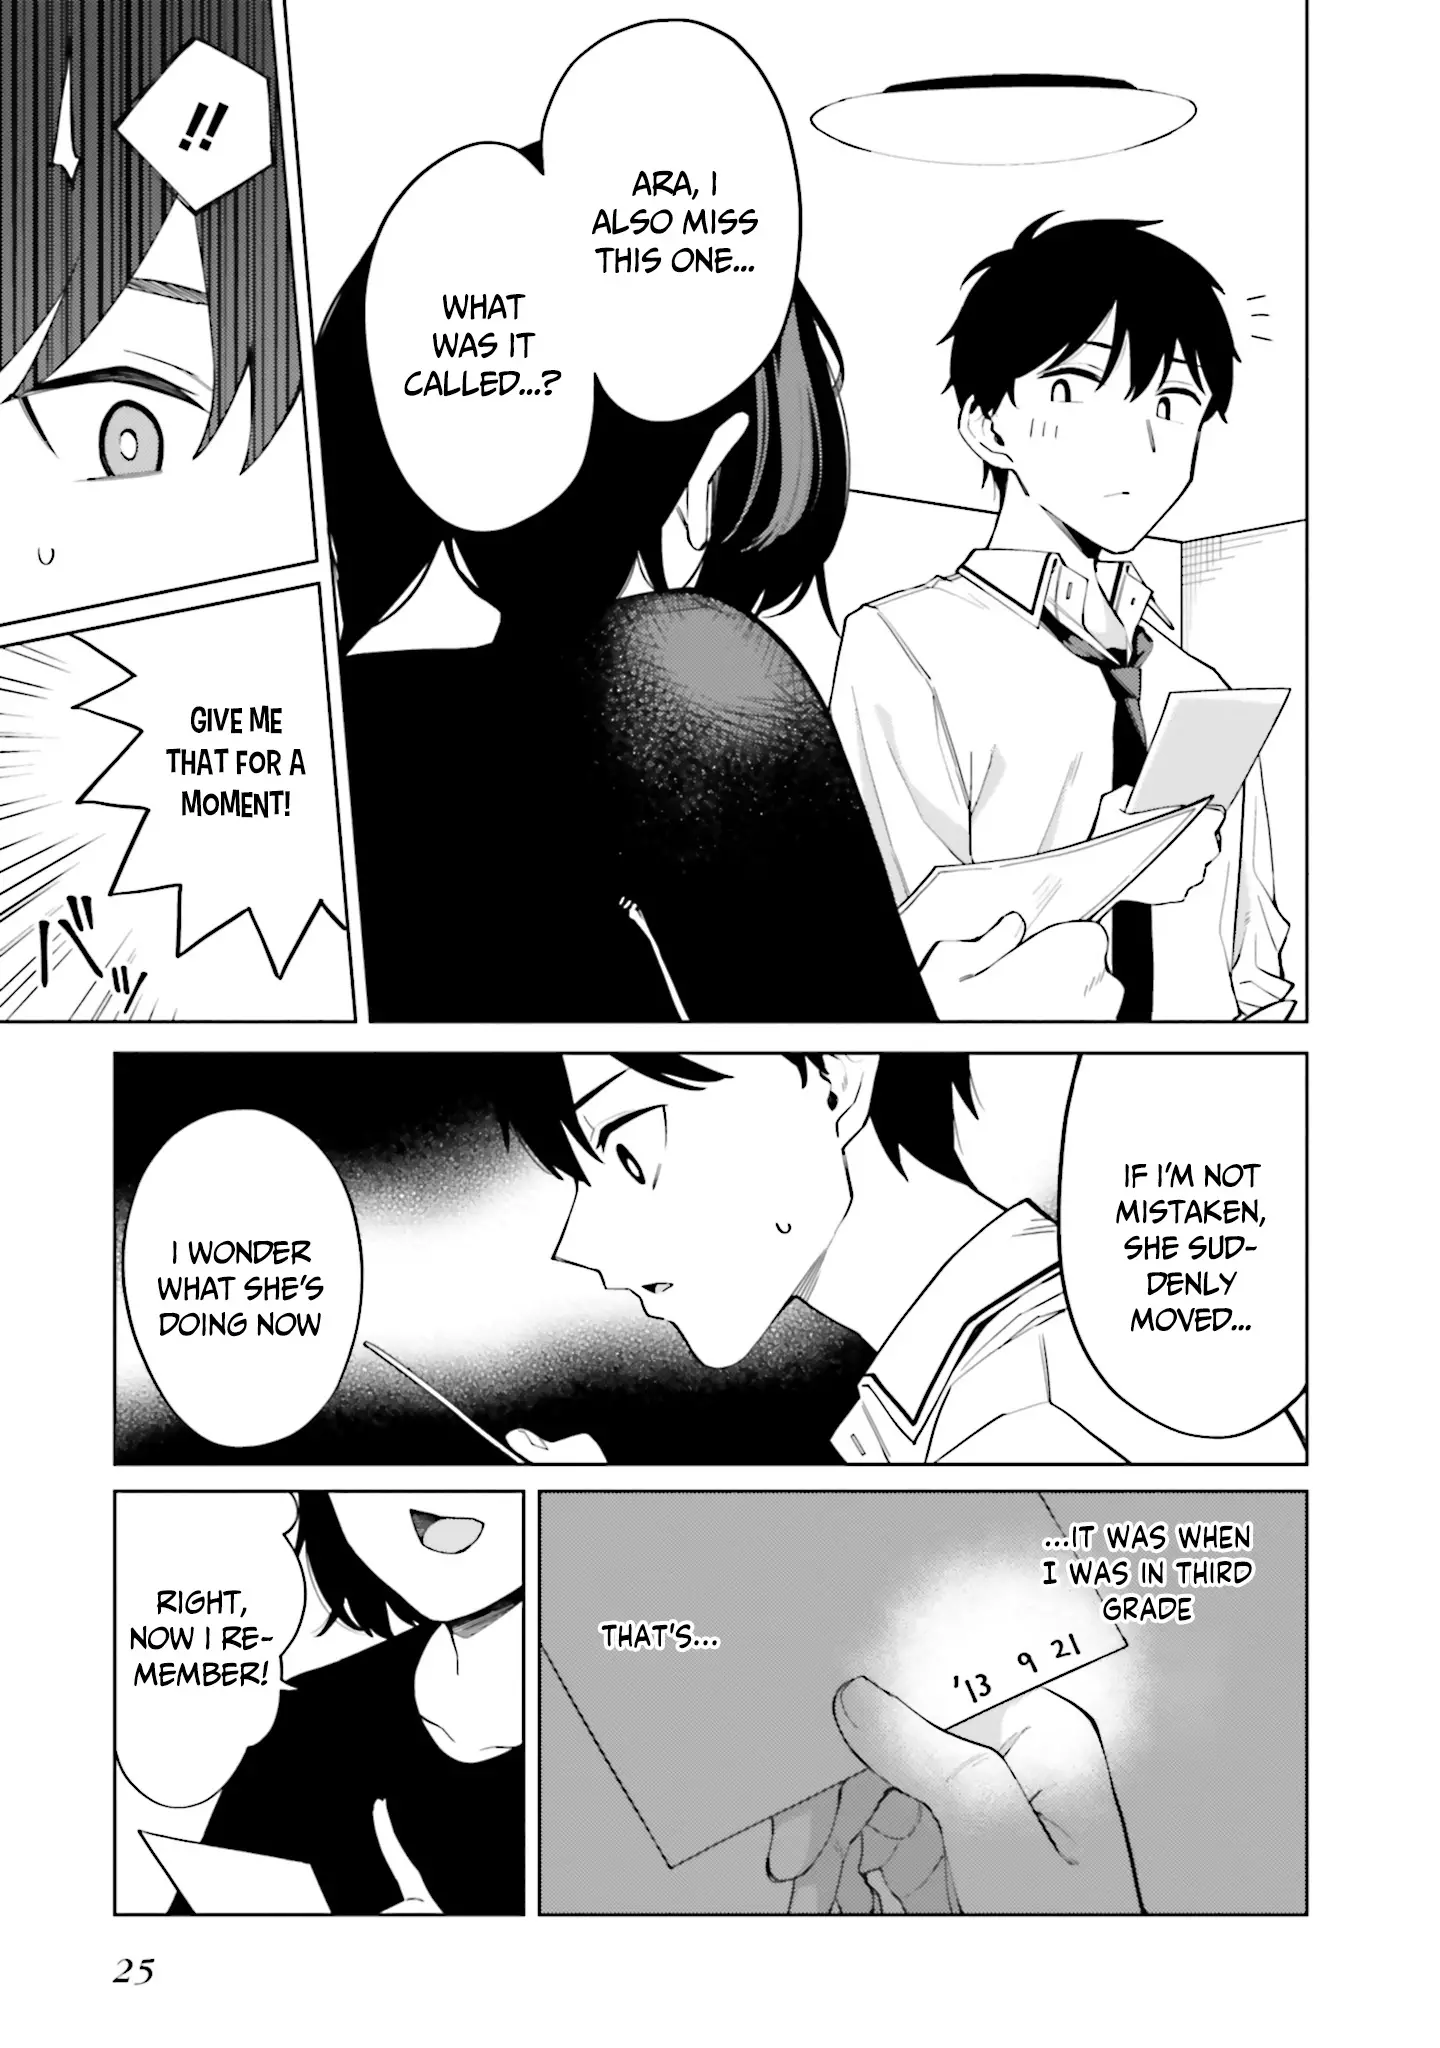 I Don't Understand Shirogane-San's Facial Expression At All - 13 page 26-92820e5e